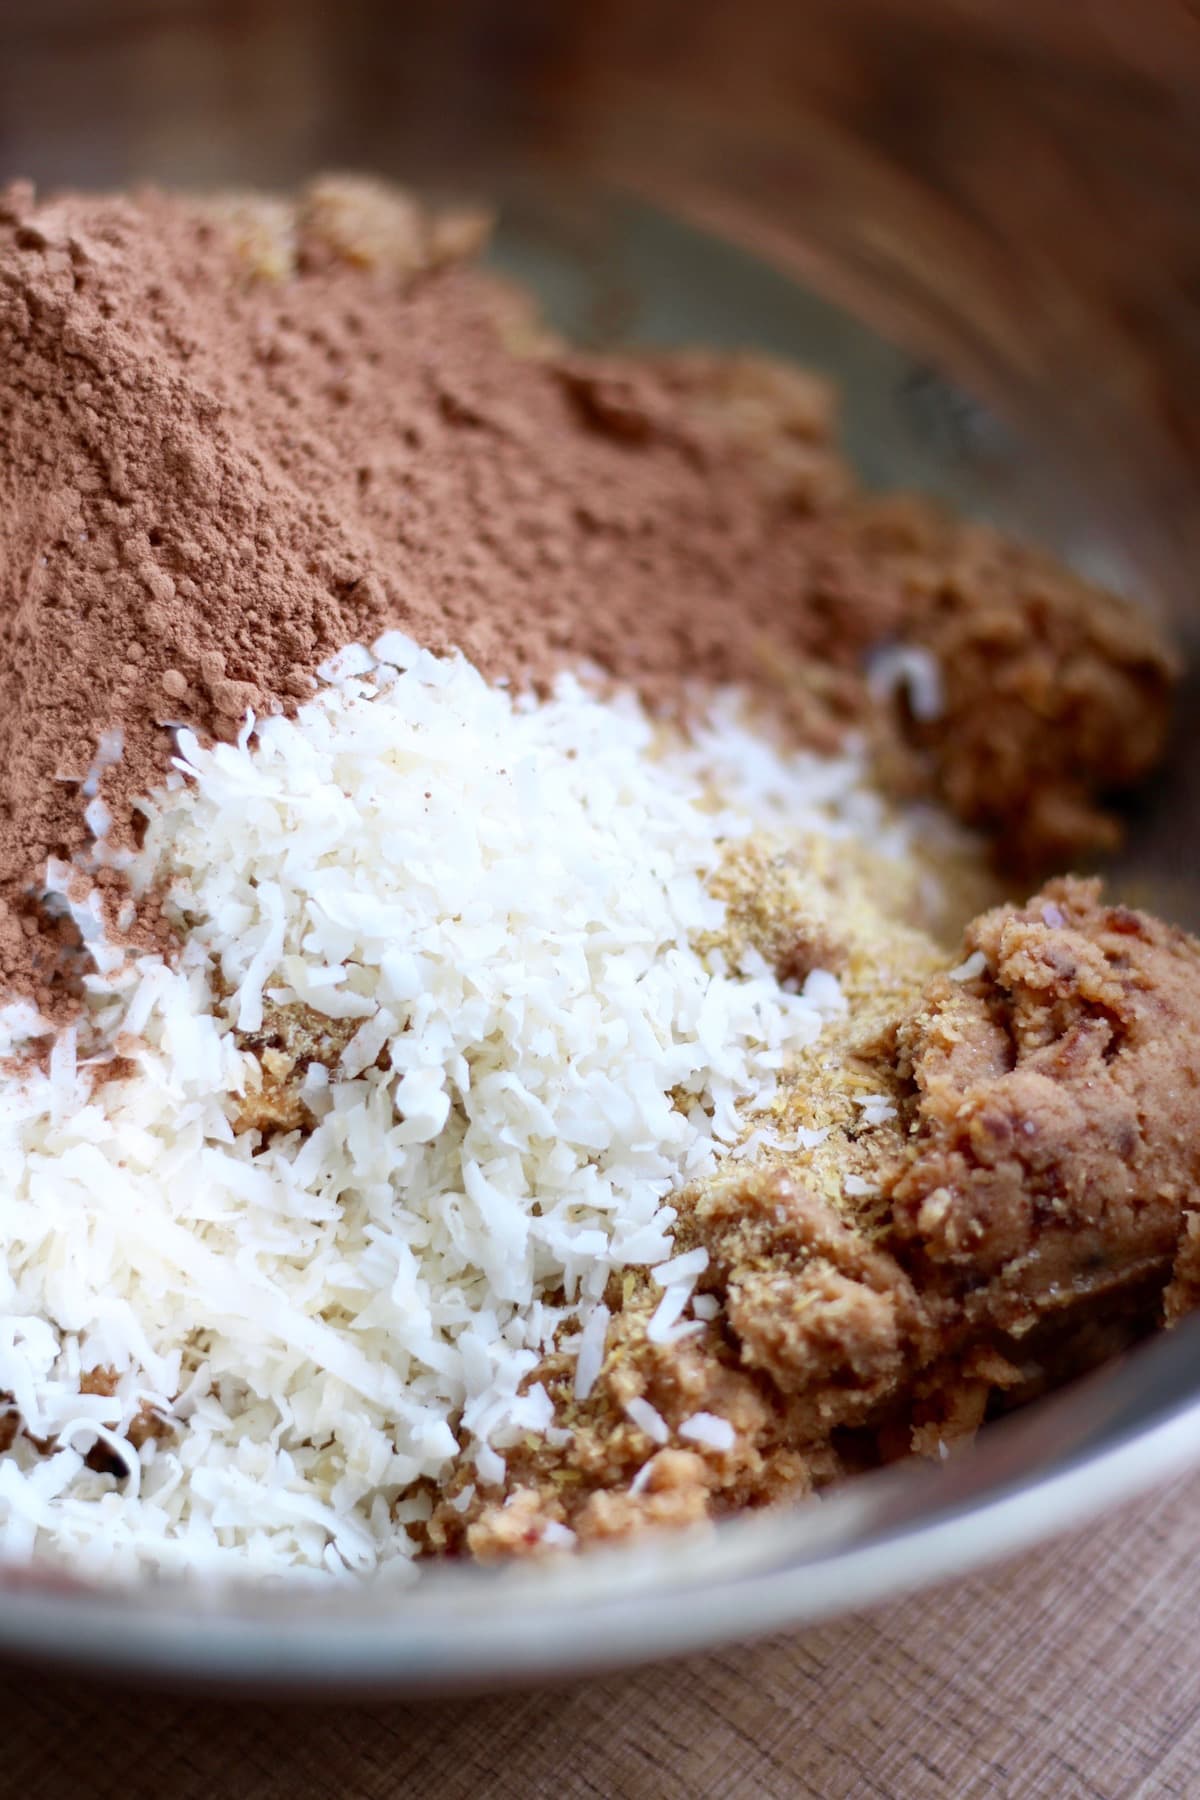 coconut flakes, cocoa powder and almond pulp in a mixing bowl